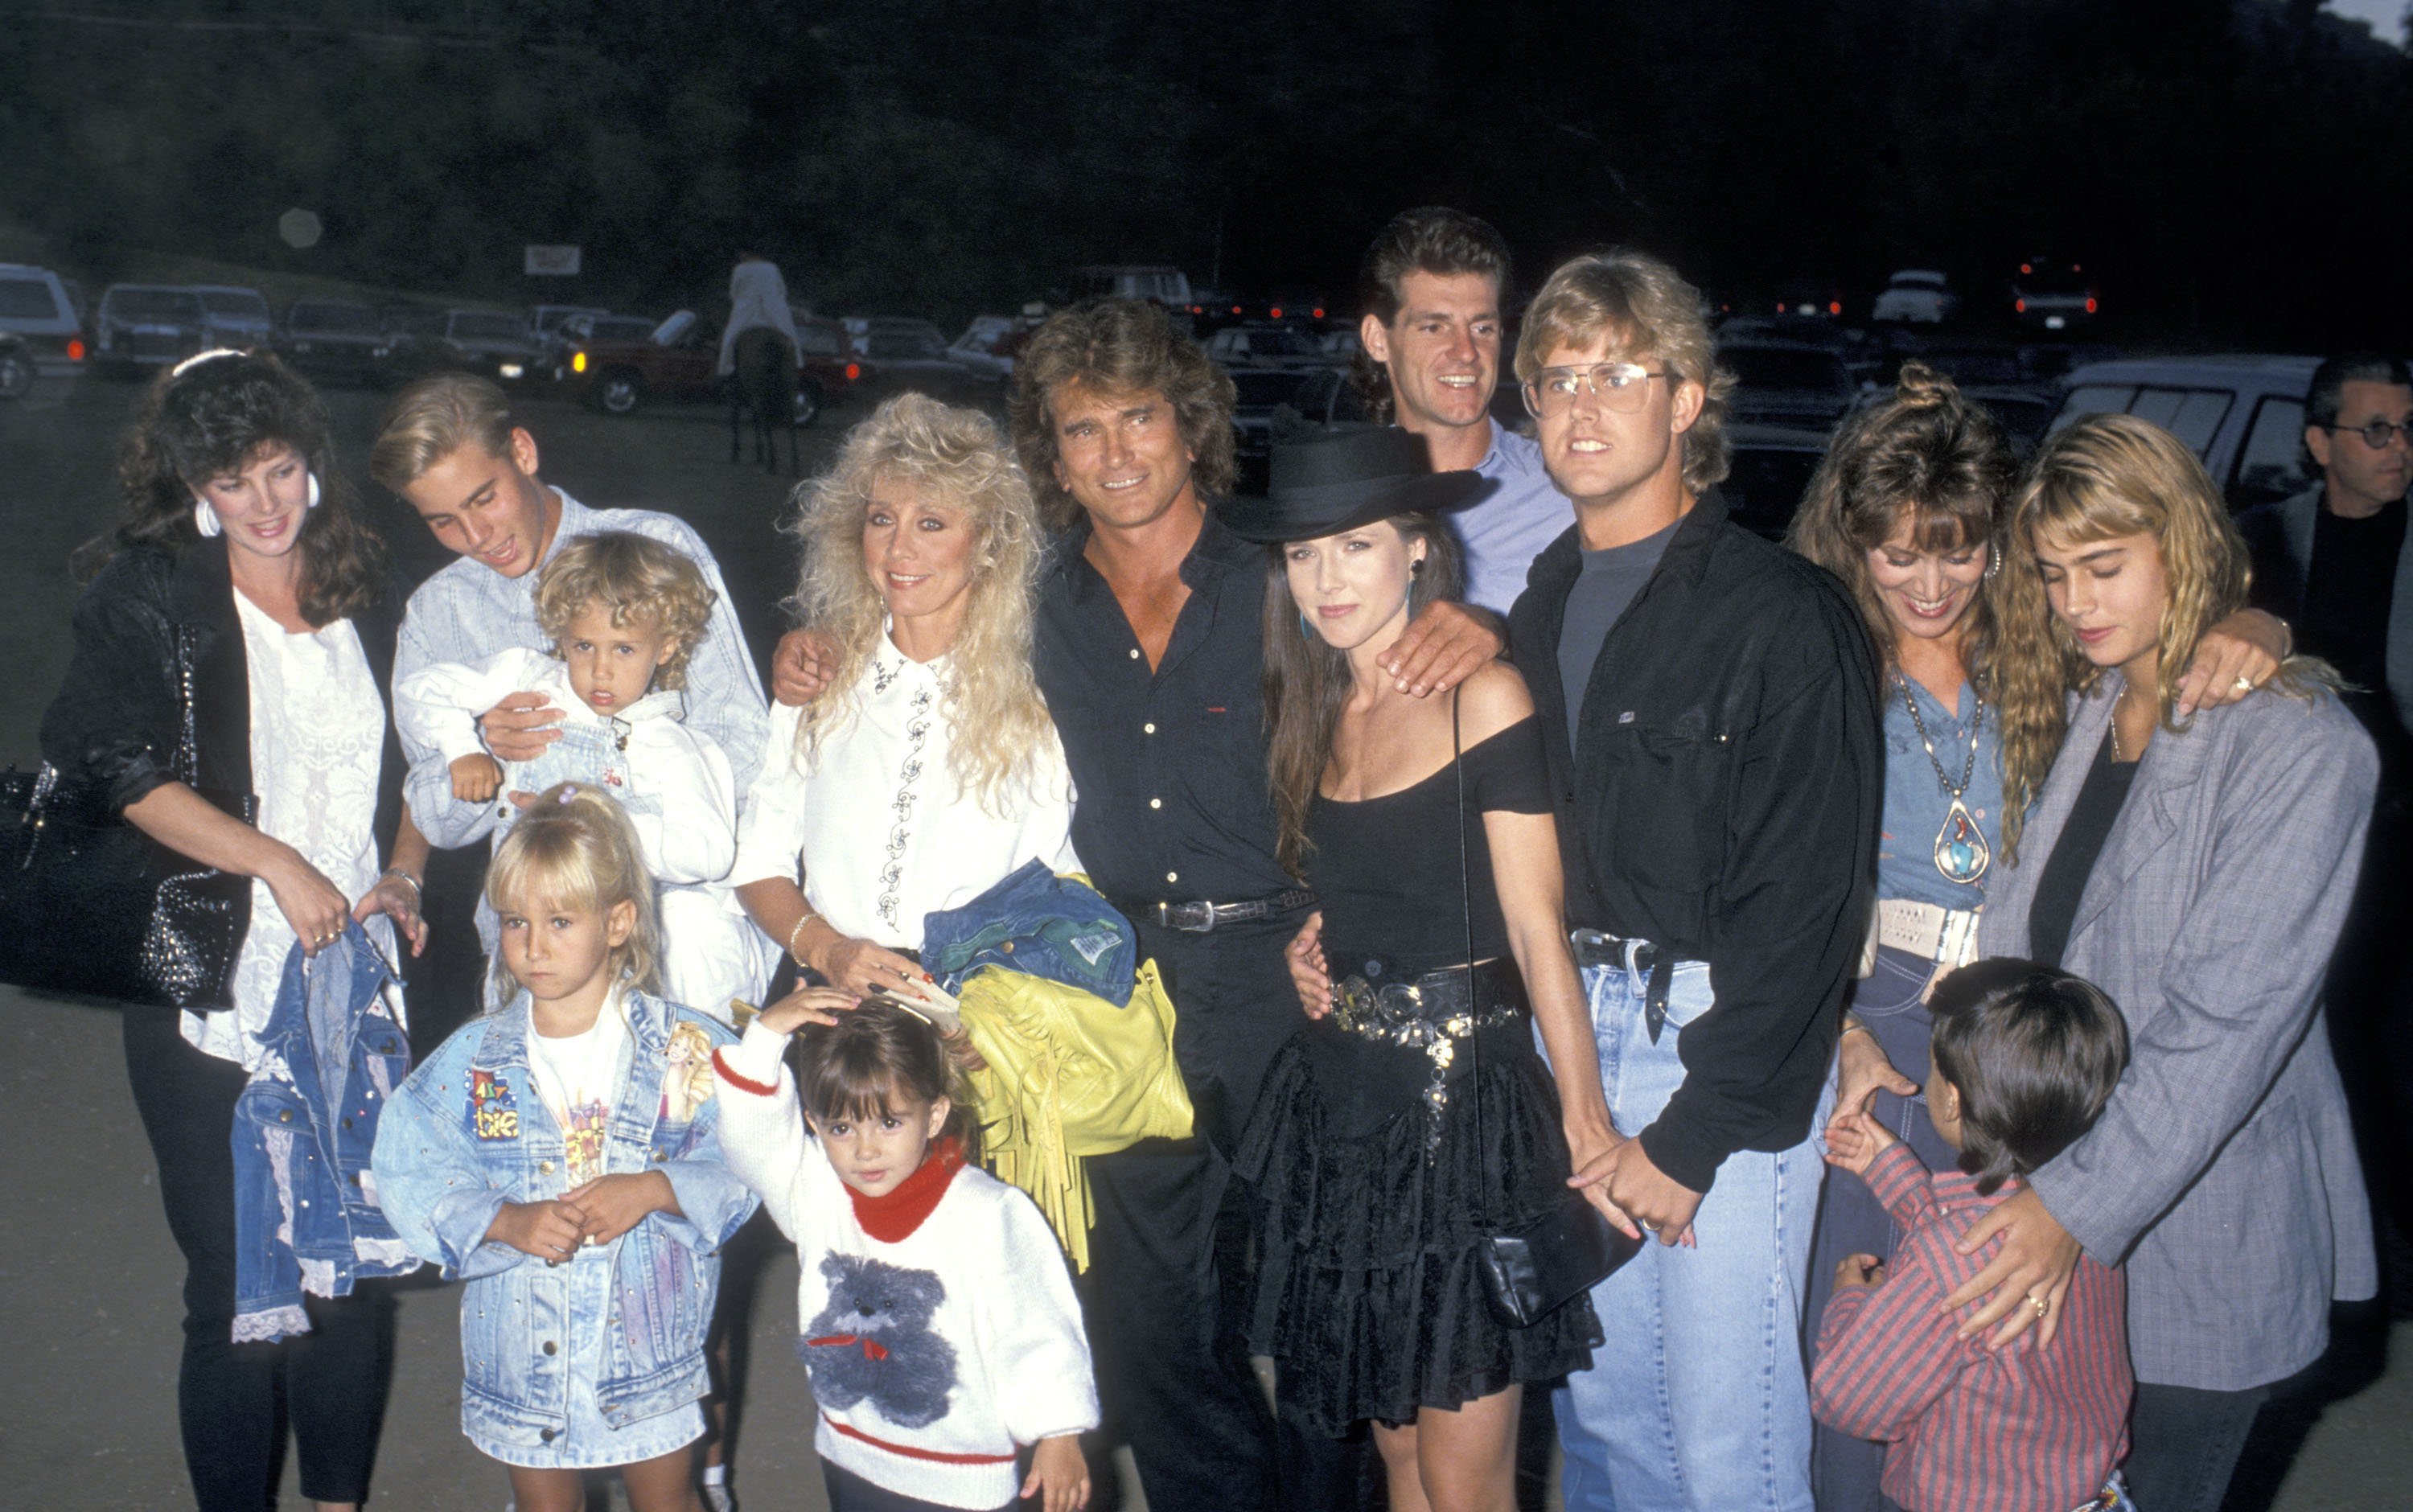 Michael Landon, Cindy Landon and his kids attend Third Annual Moonlight Roundup Benefiting Free Arts for Abused Children on July 29, 1989 | Photo: GettyImages